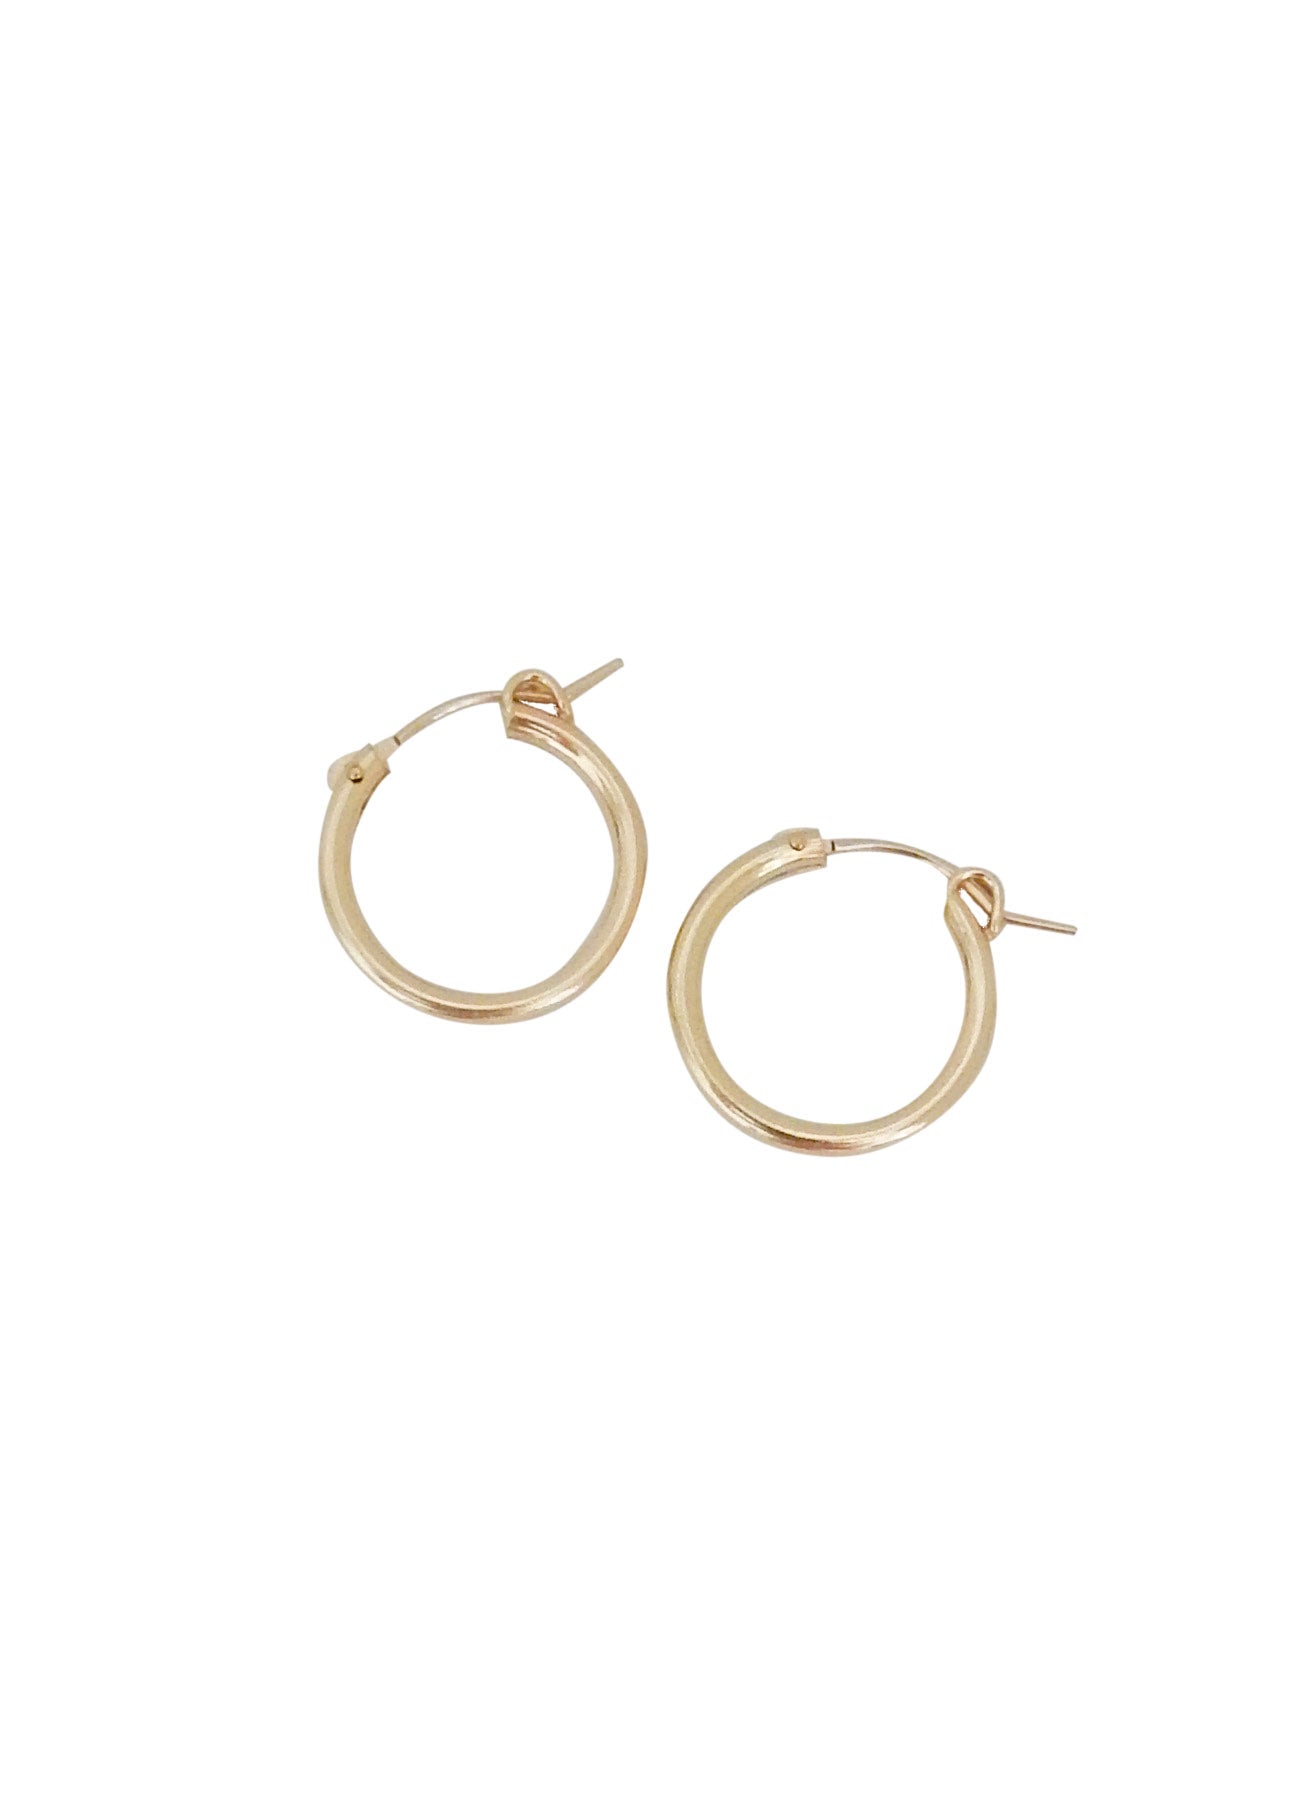 Apostle In House Collection  |  Myah xs Hoops, Gold or Silver